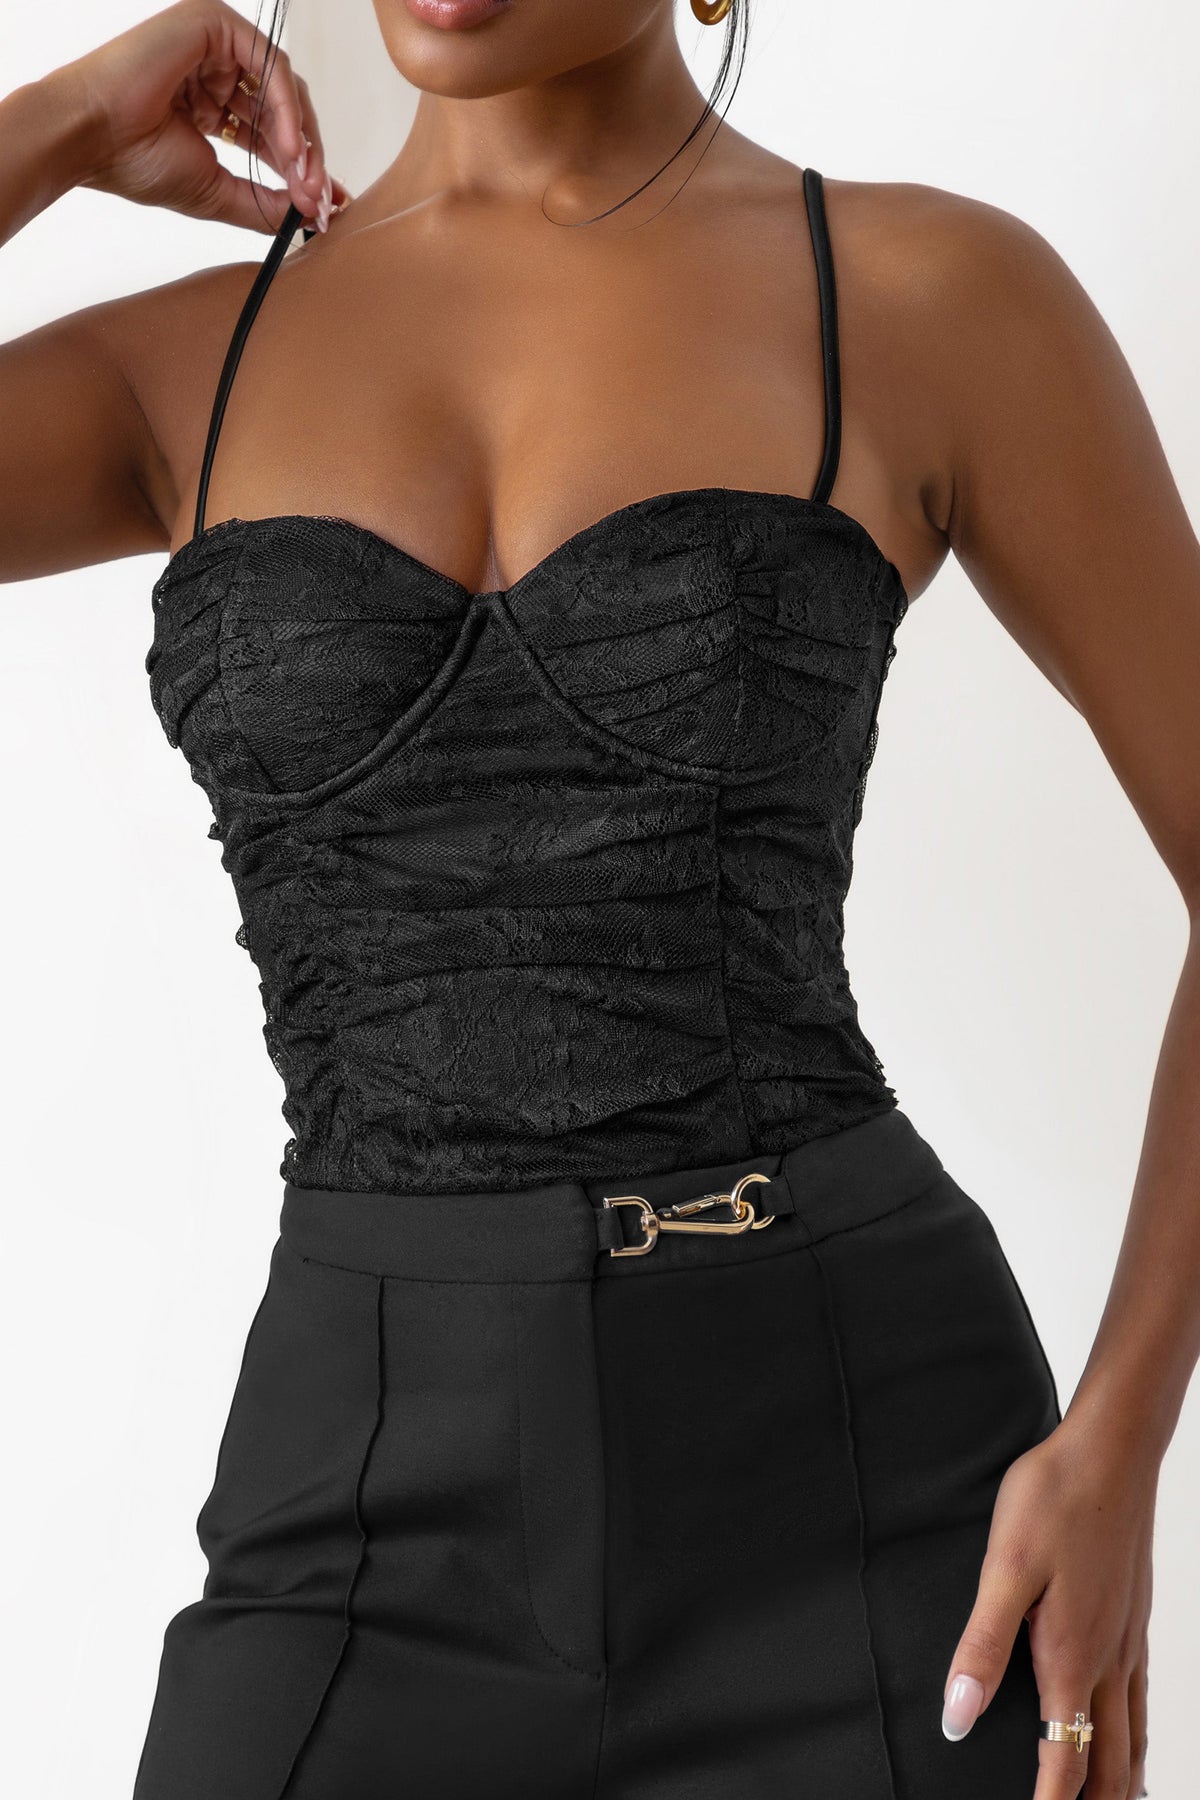 Talulla Black Lace Ruched Mesh Top With Bra Cup Detail – Club L London - IRE